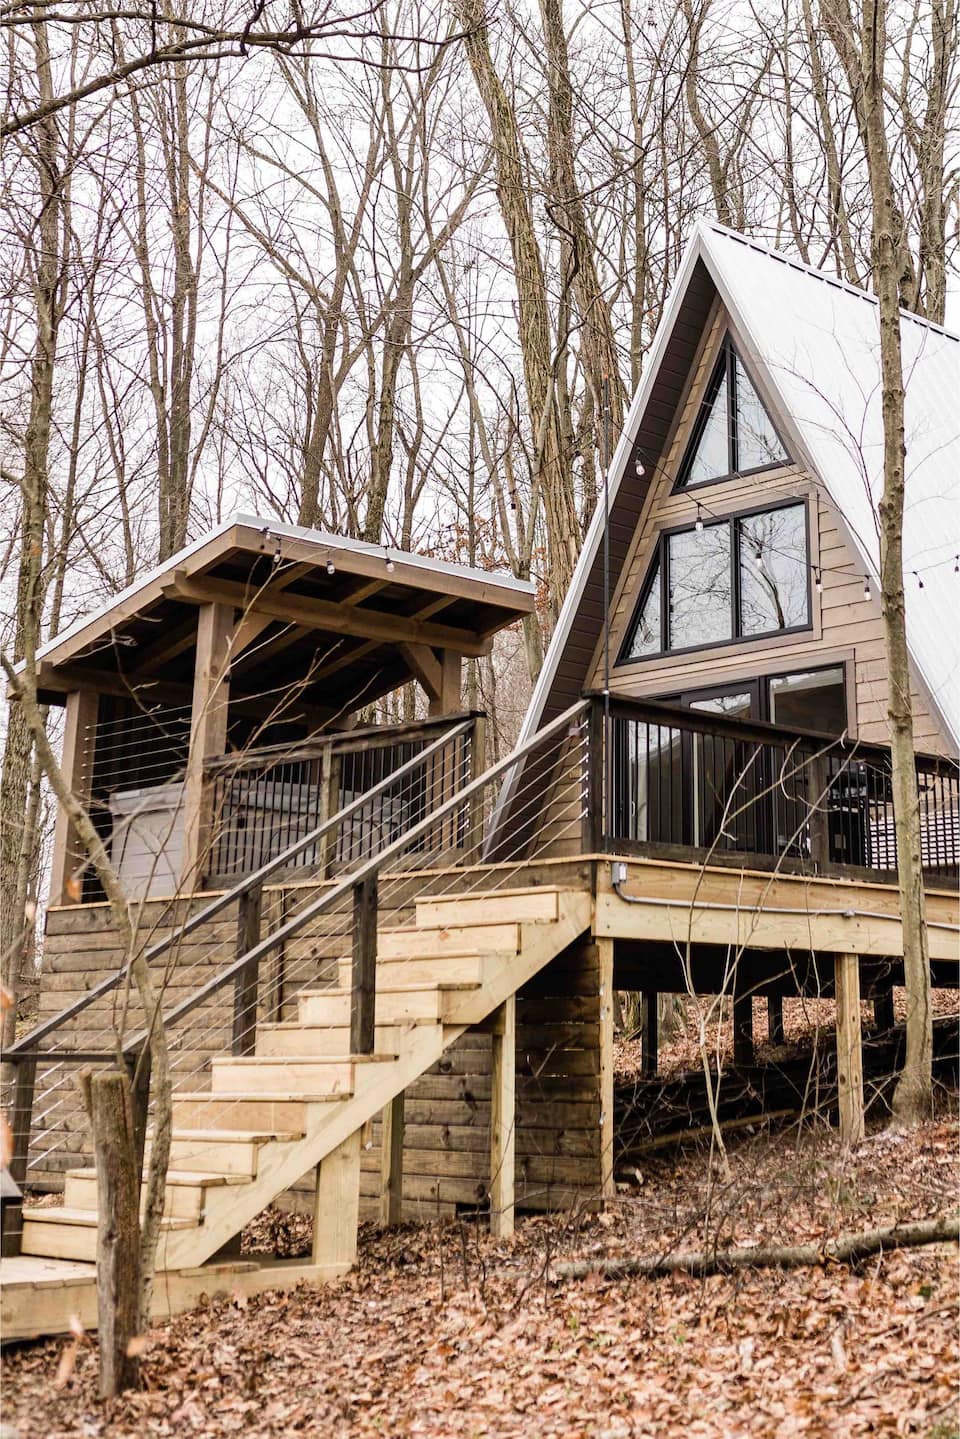 Creekside Dwellings A-Frame Secluded Cabins Ohio